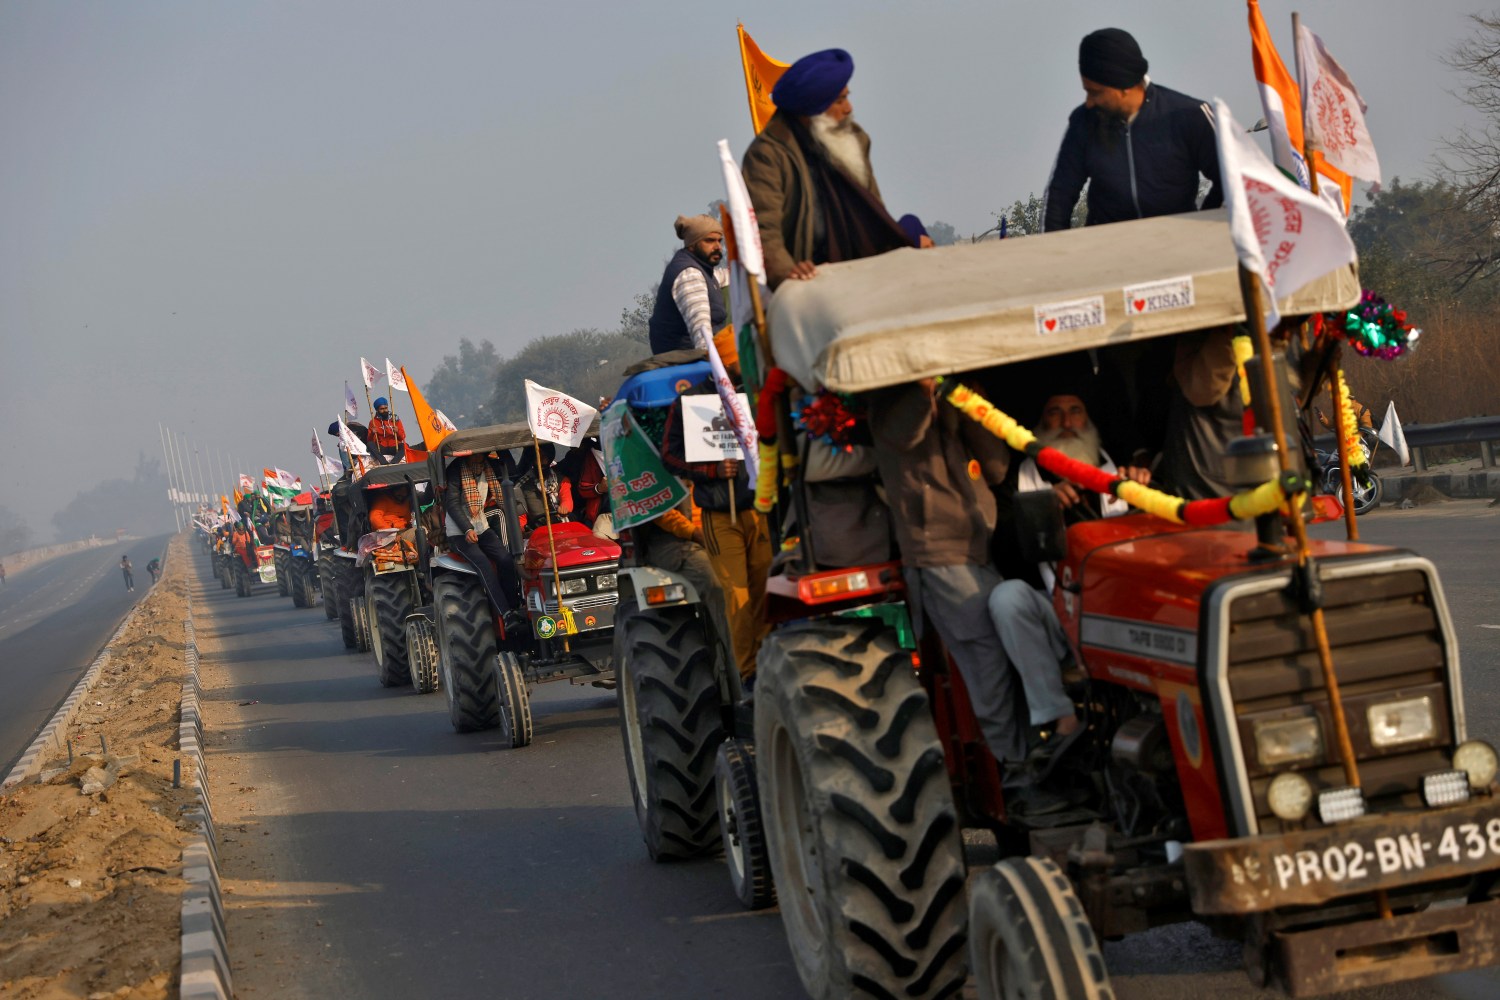 Farmers take part in a tractor rally to protest against farm laws on the occasion of India's Republic Day in Delhi, India, January 26, 2021. REUTERS/Danish Siddiqui